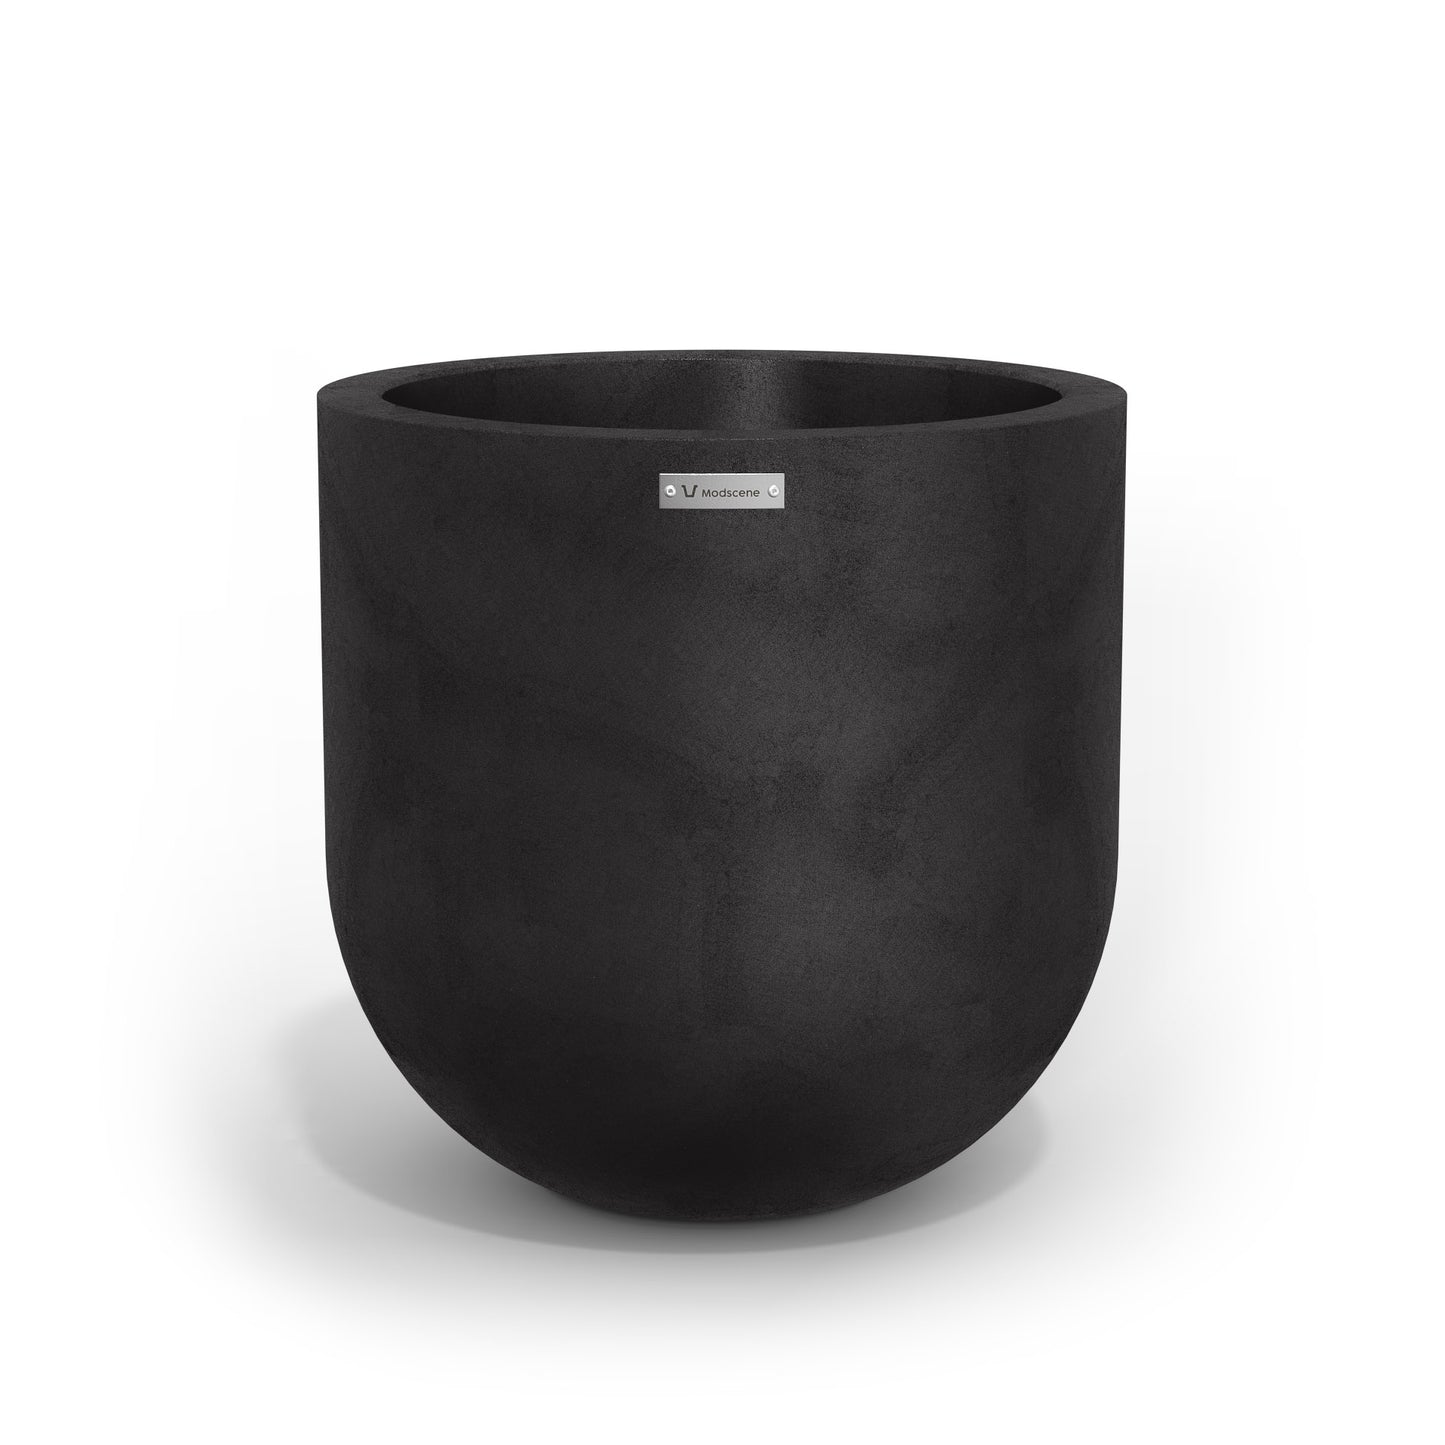 A medium sized planter pot in a matte black colour made by Modscene.